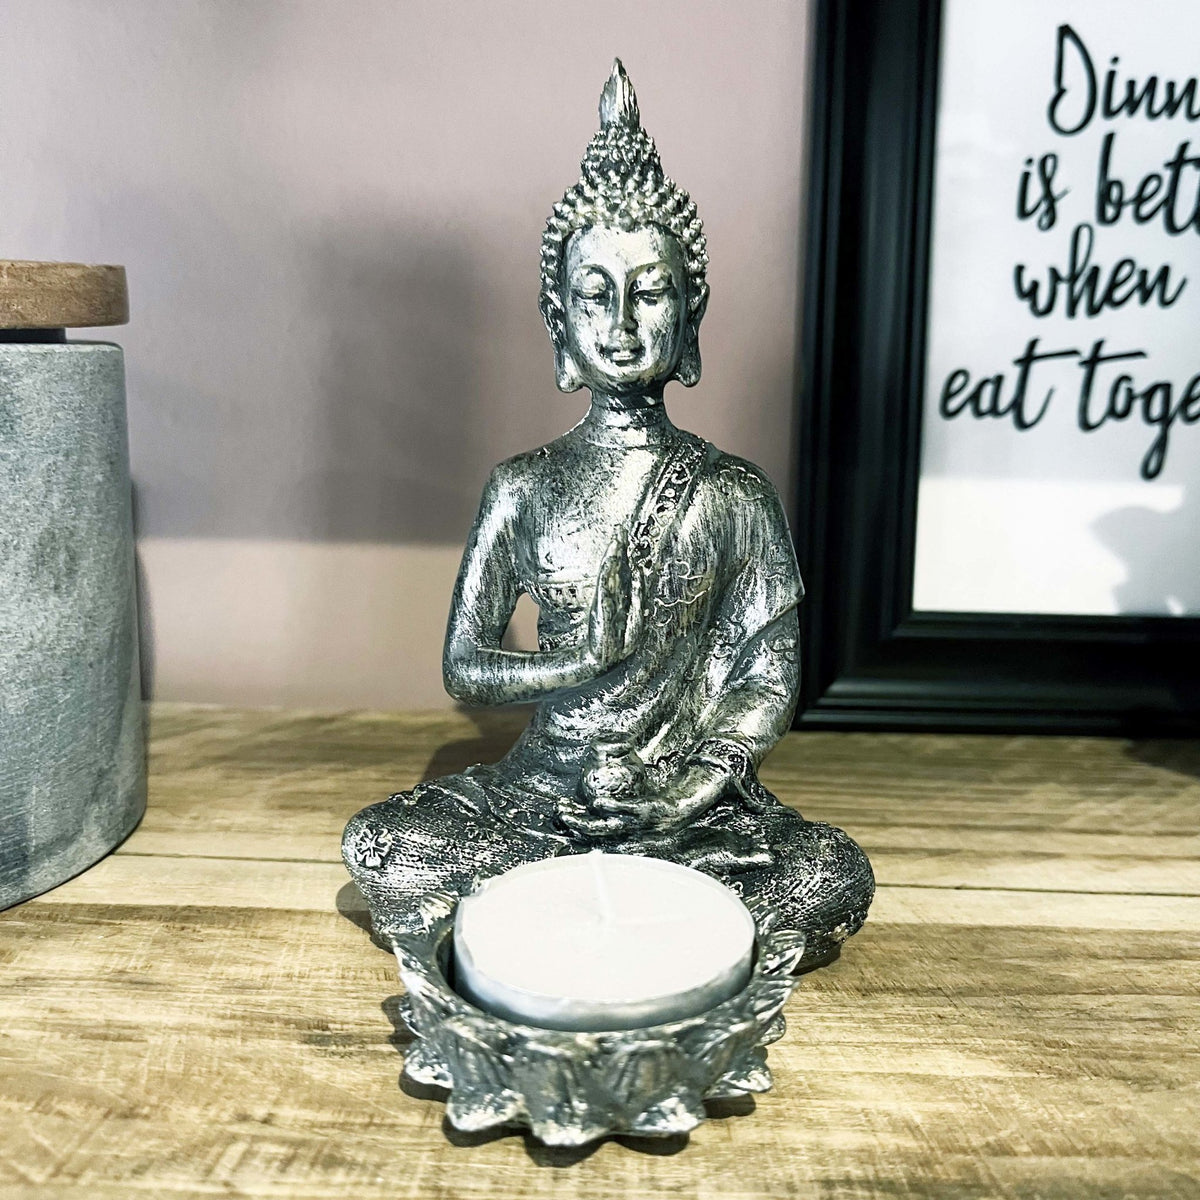 Silver Effect Buddha Candle Holder on wooden kitchen shelving